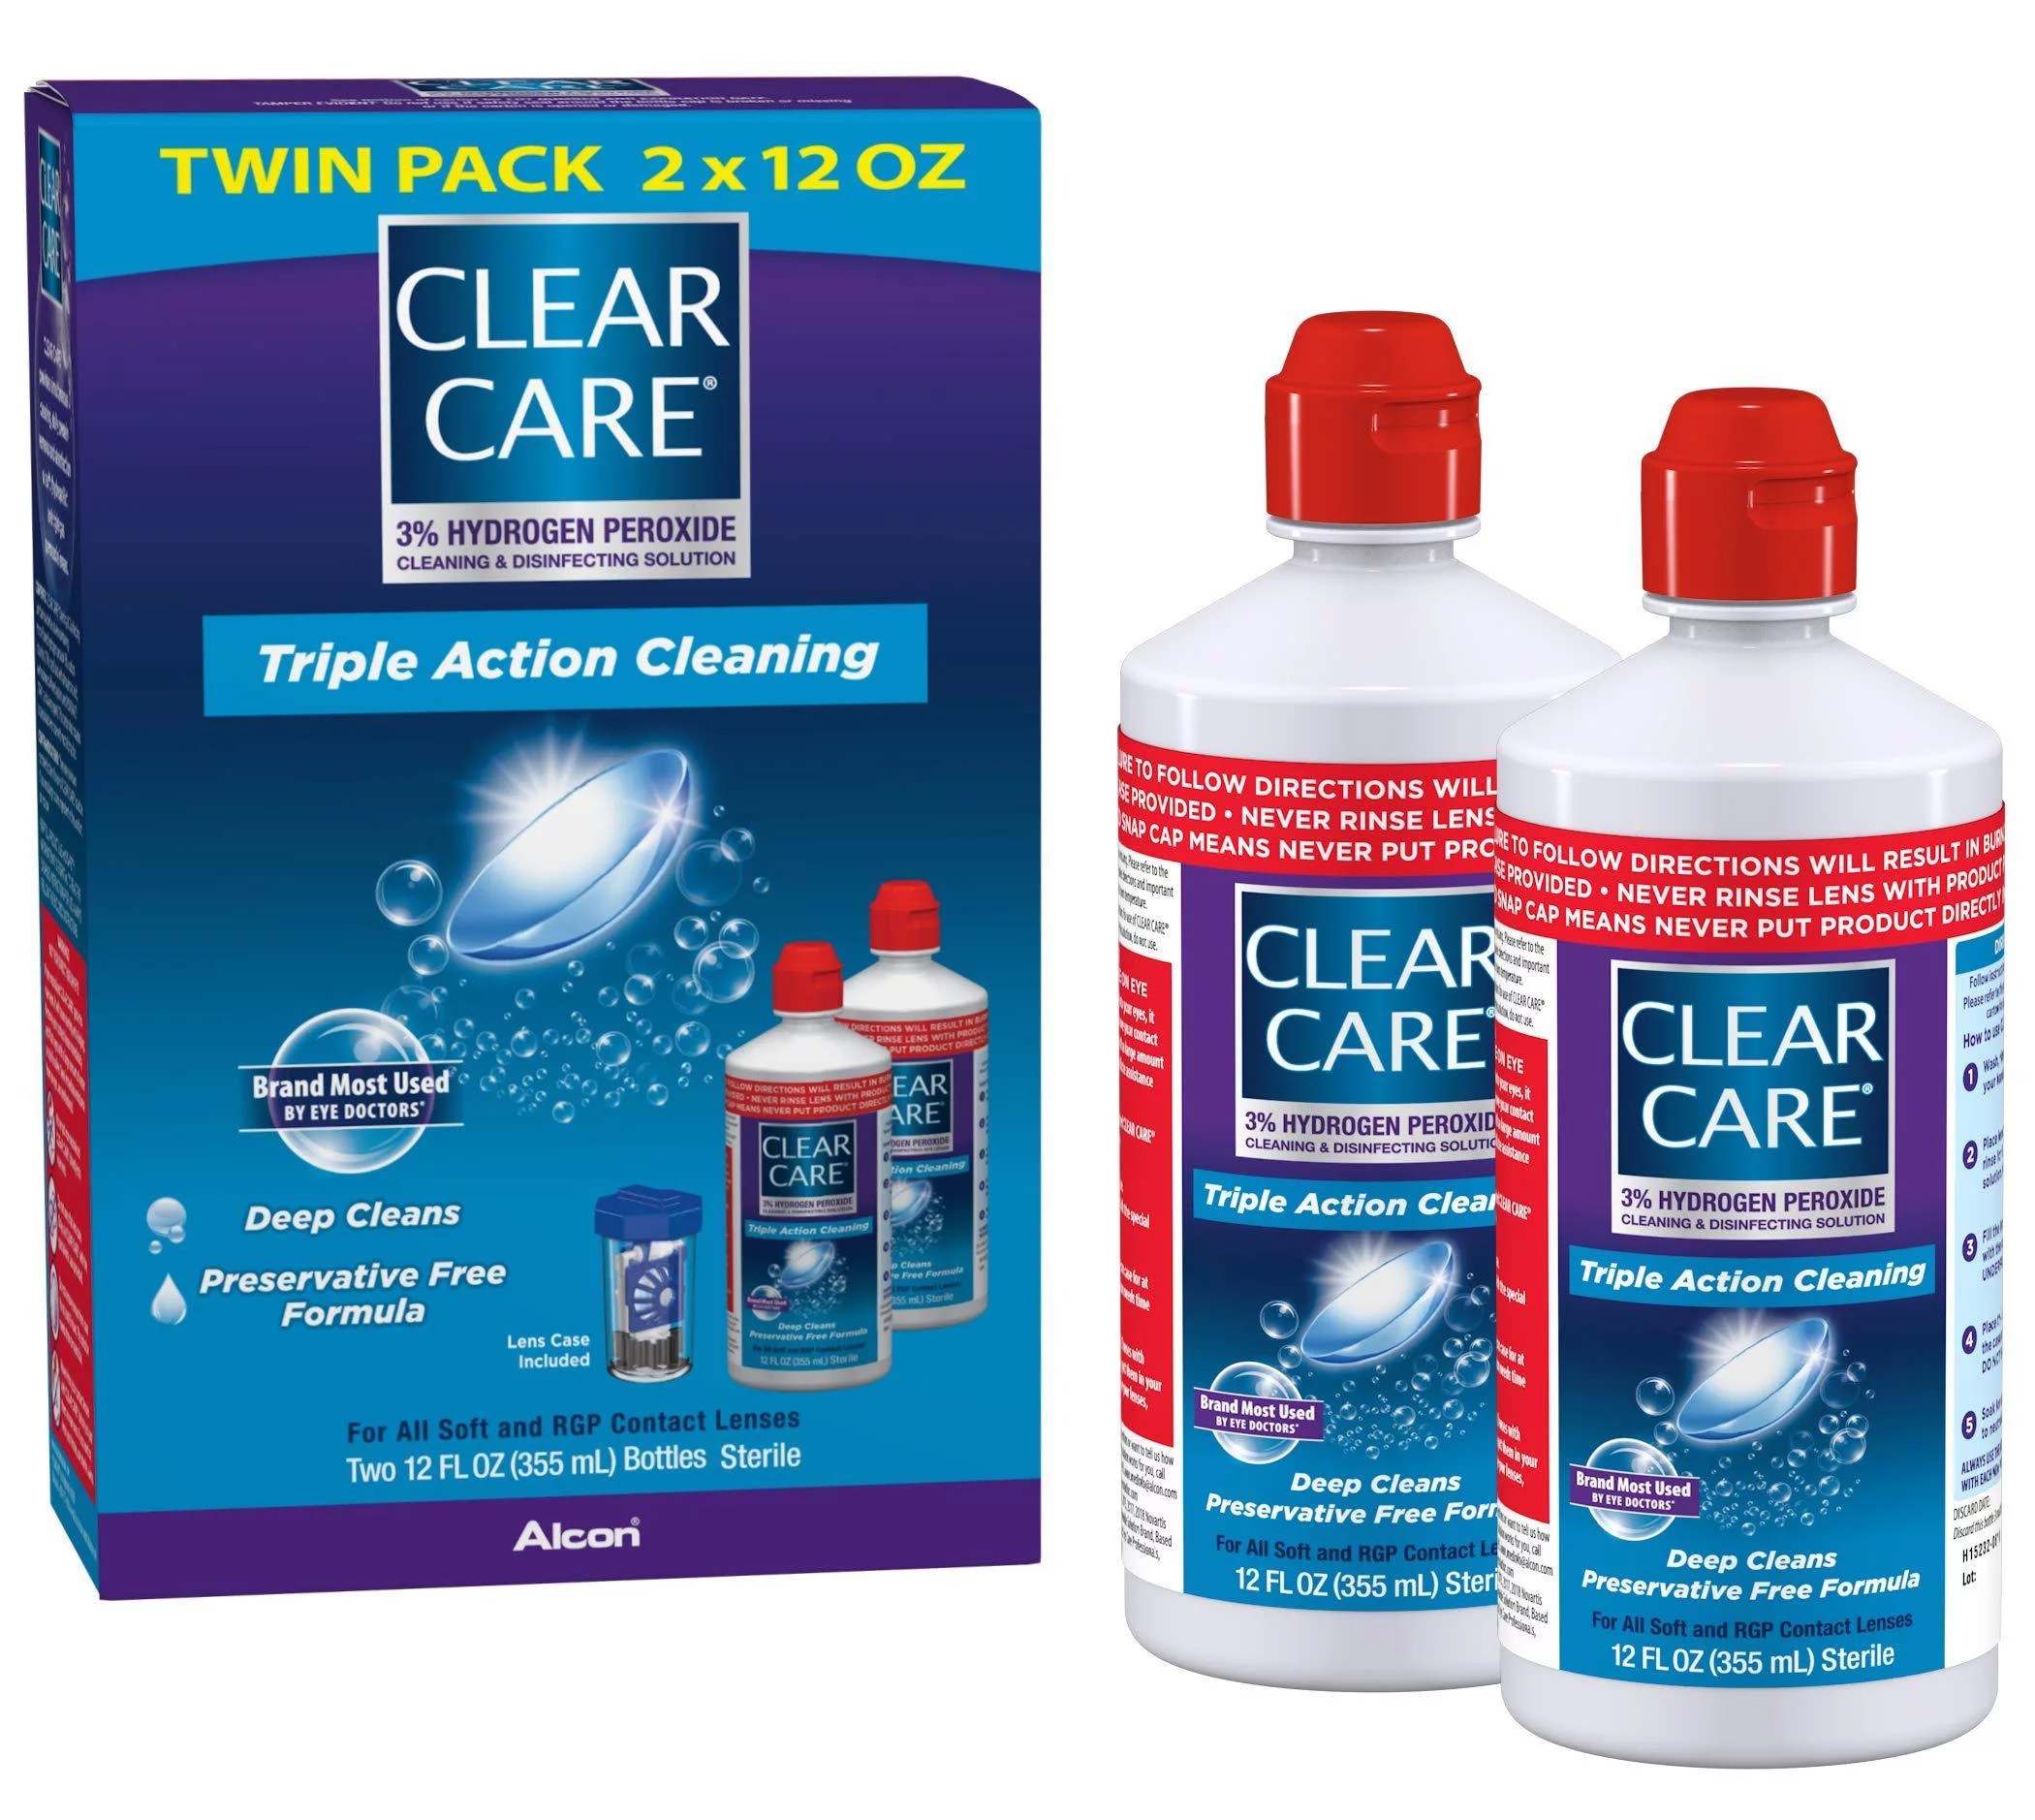 Clear Care Cleaning Disinfecting Solution with Lens Case